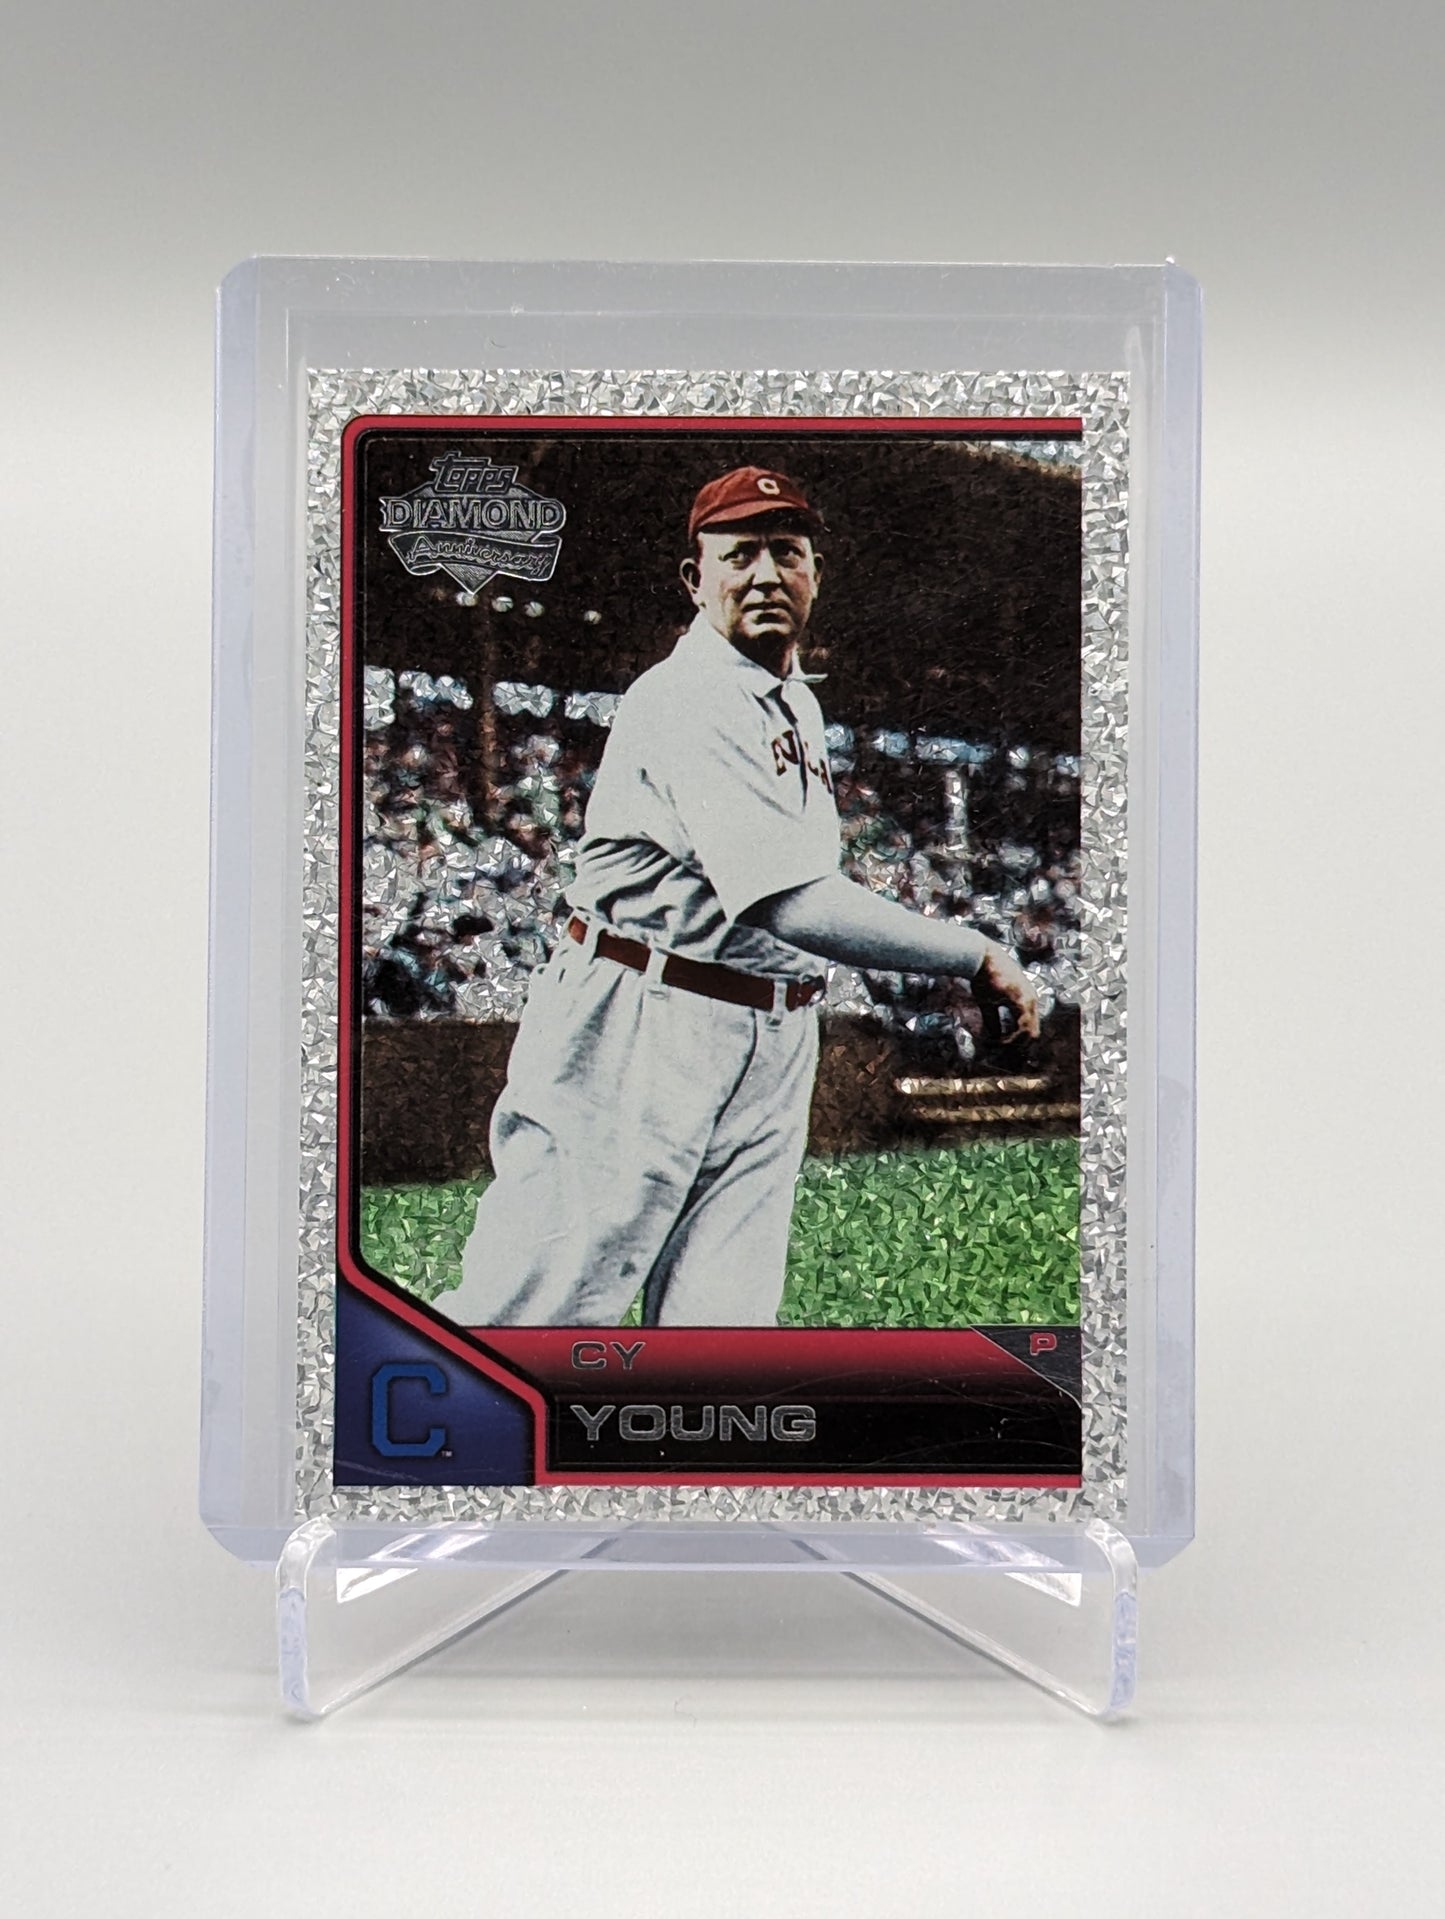 2011 Topps Lineage Diamond Anniversary Platinum Refractor #106 Cy Young Indians Spiders